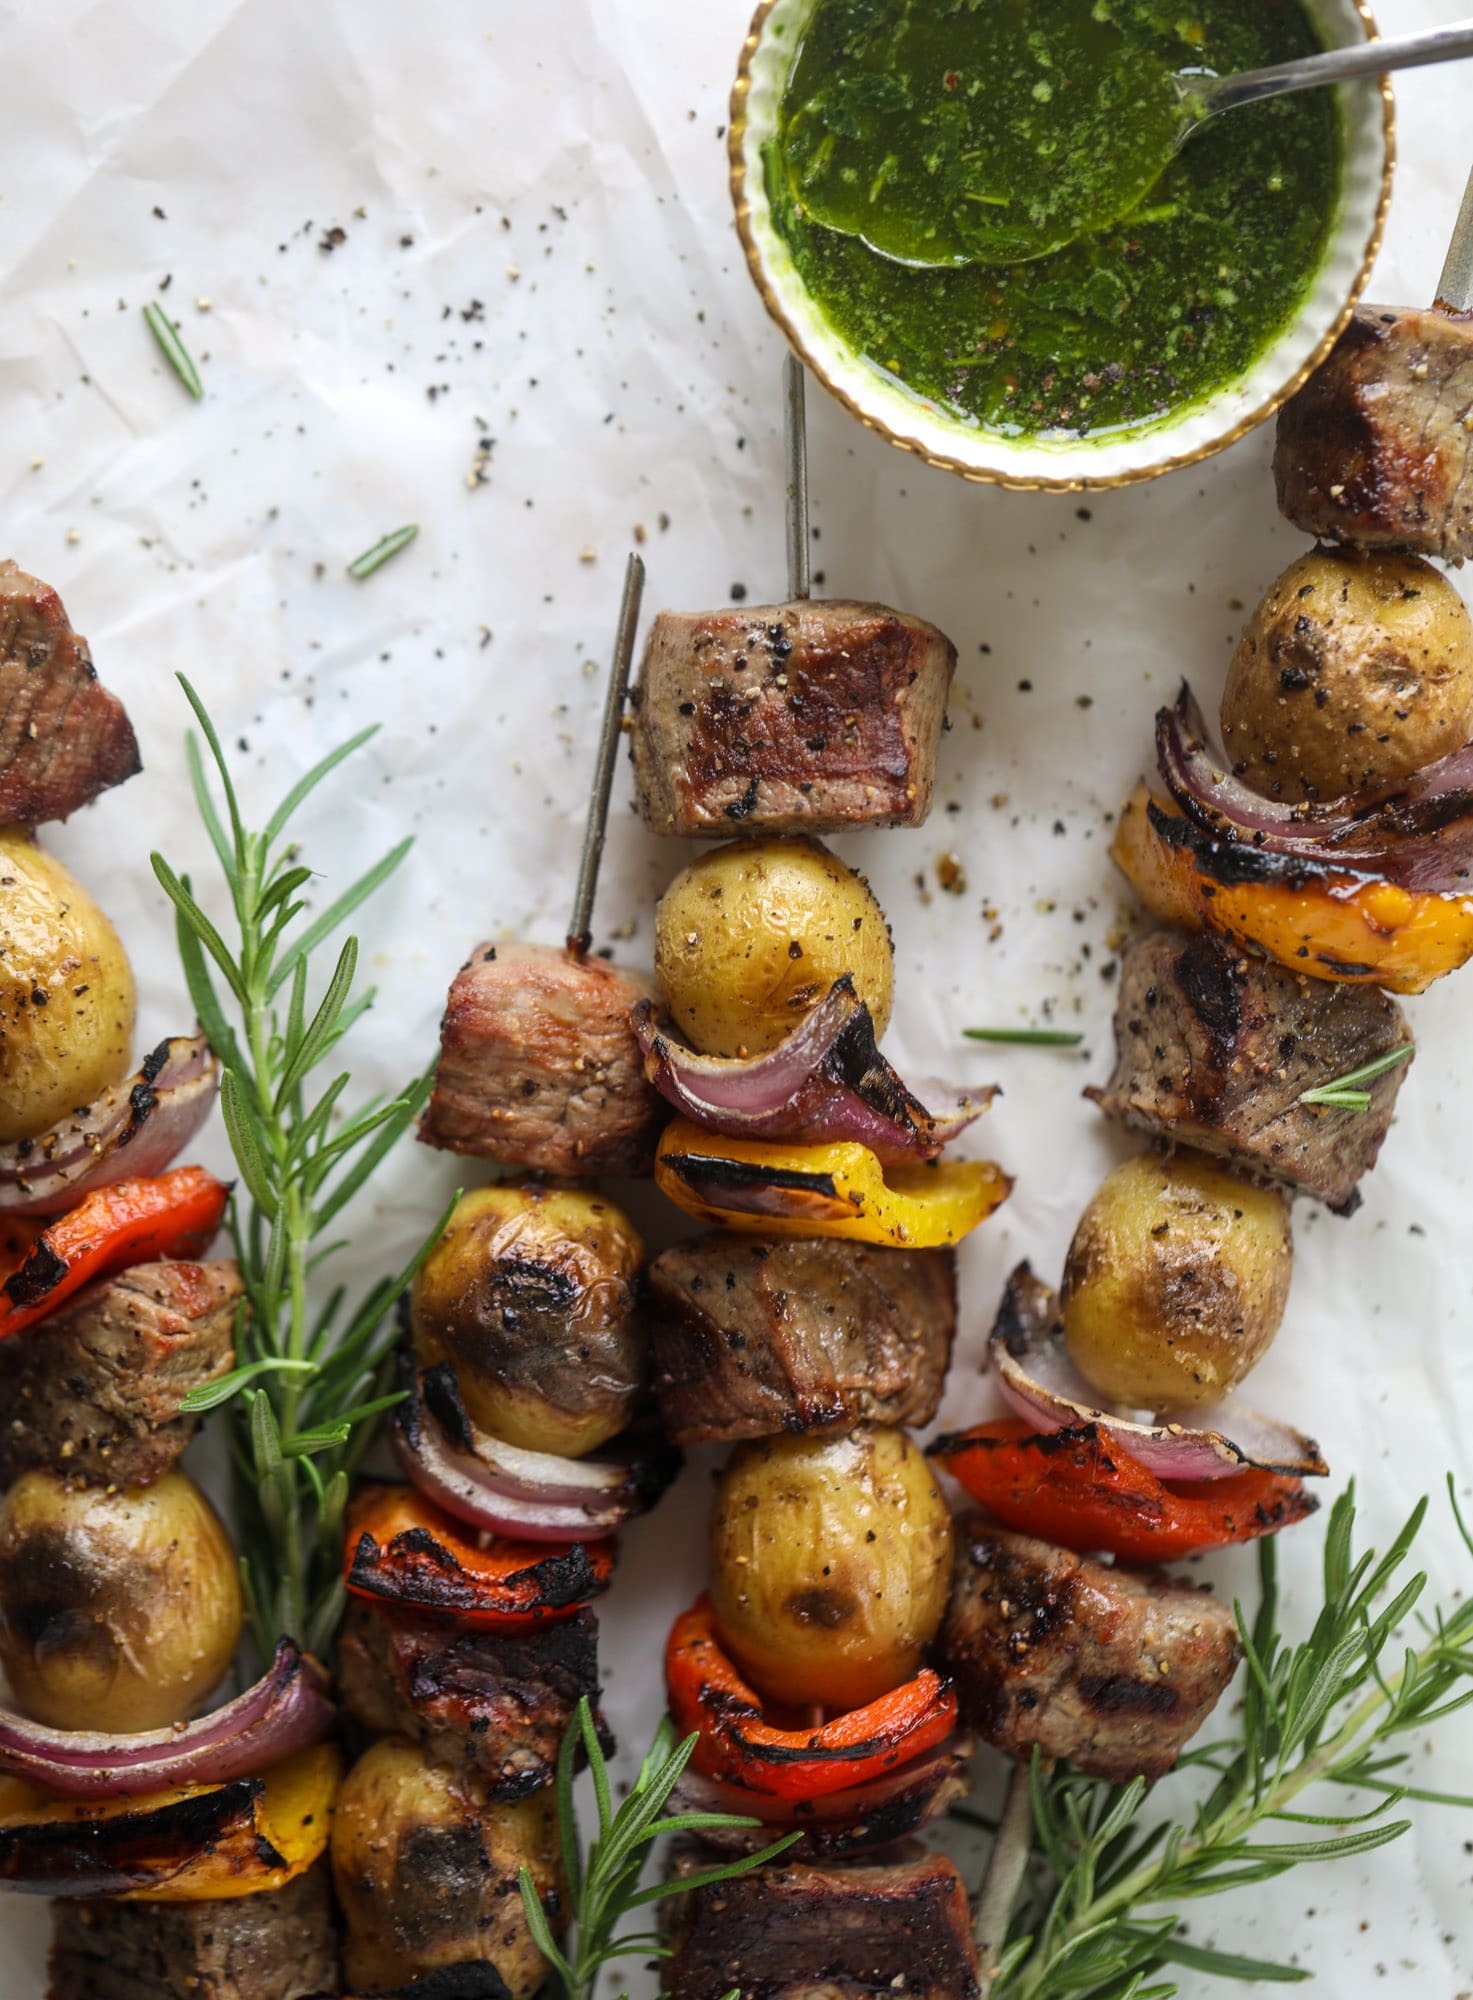 These steak and potato skewers are a complete meal in one! Serve with chimichurri for the ultimate flavor explosion. These are delicious!